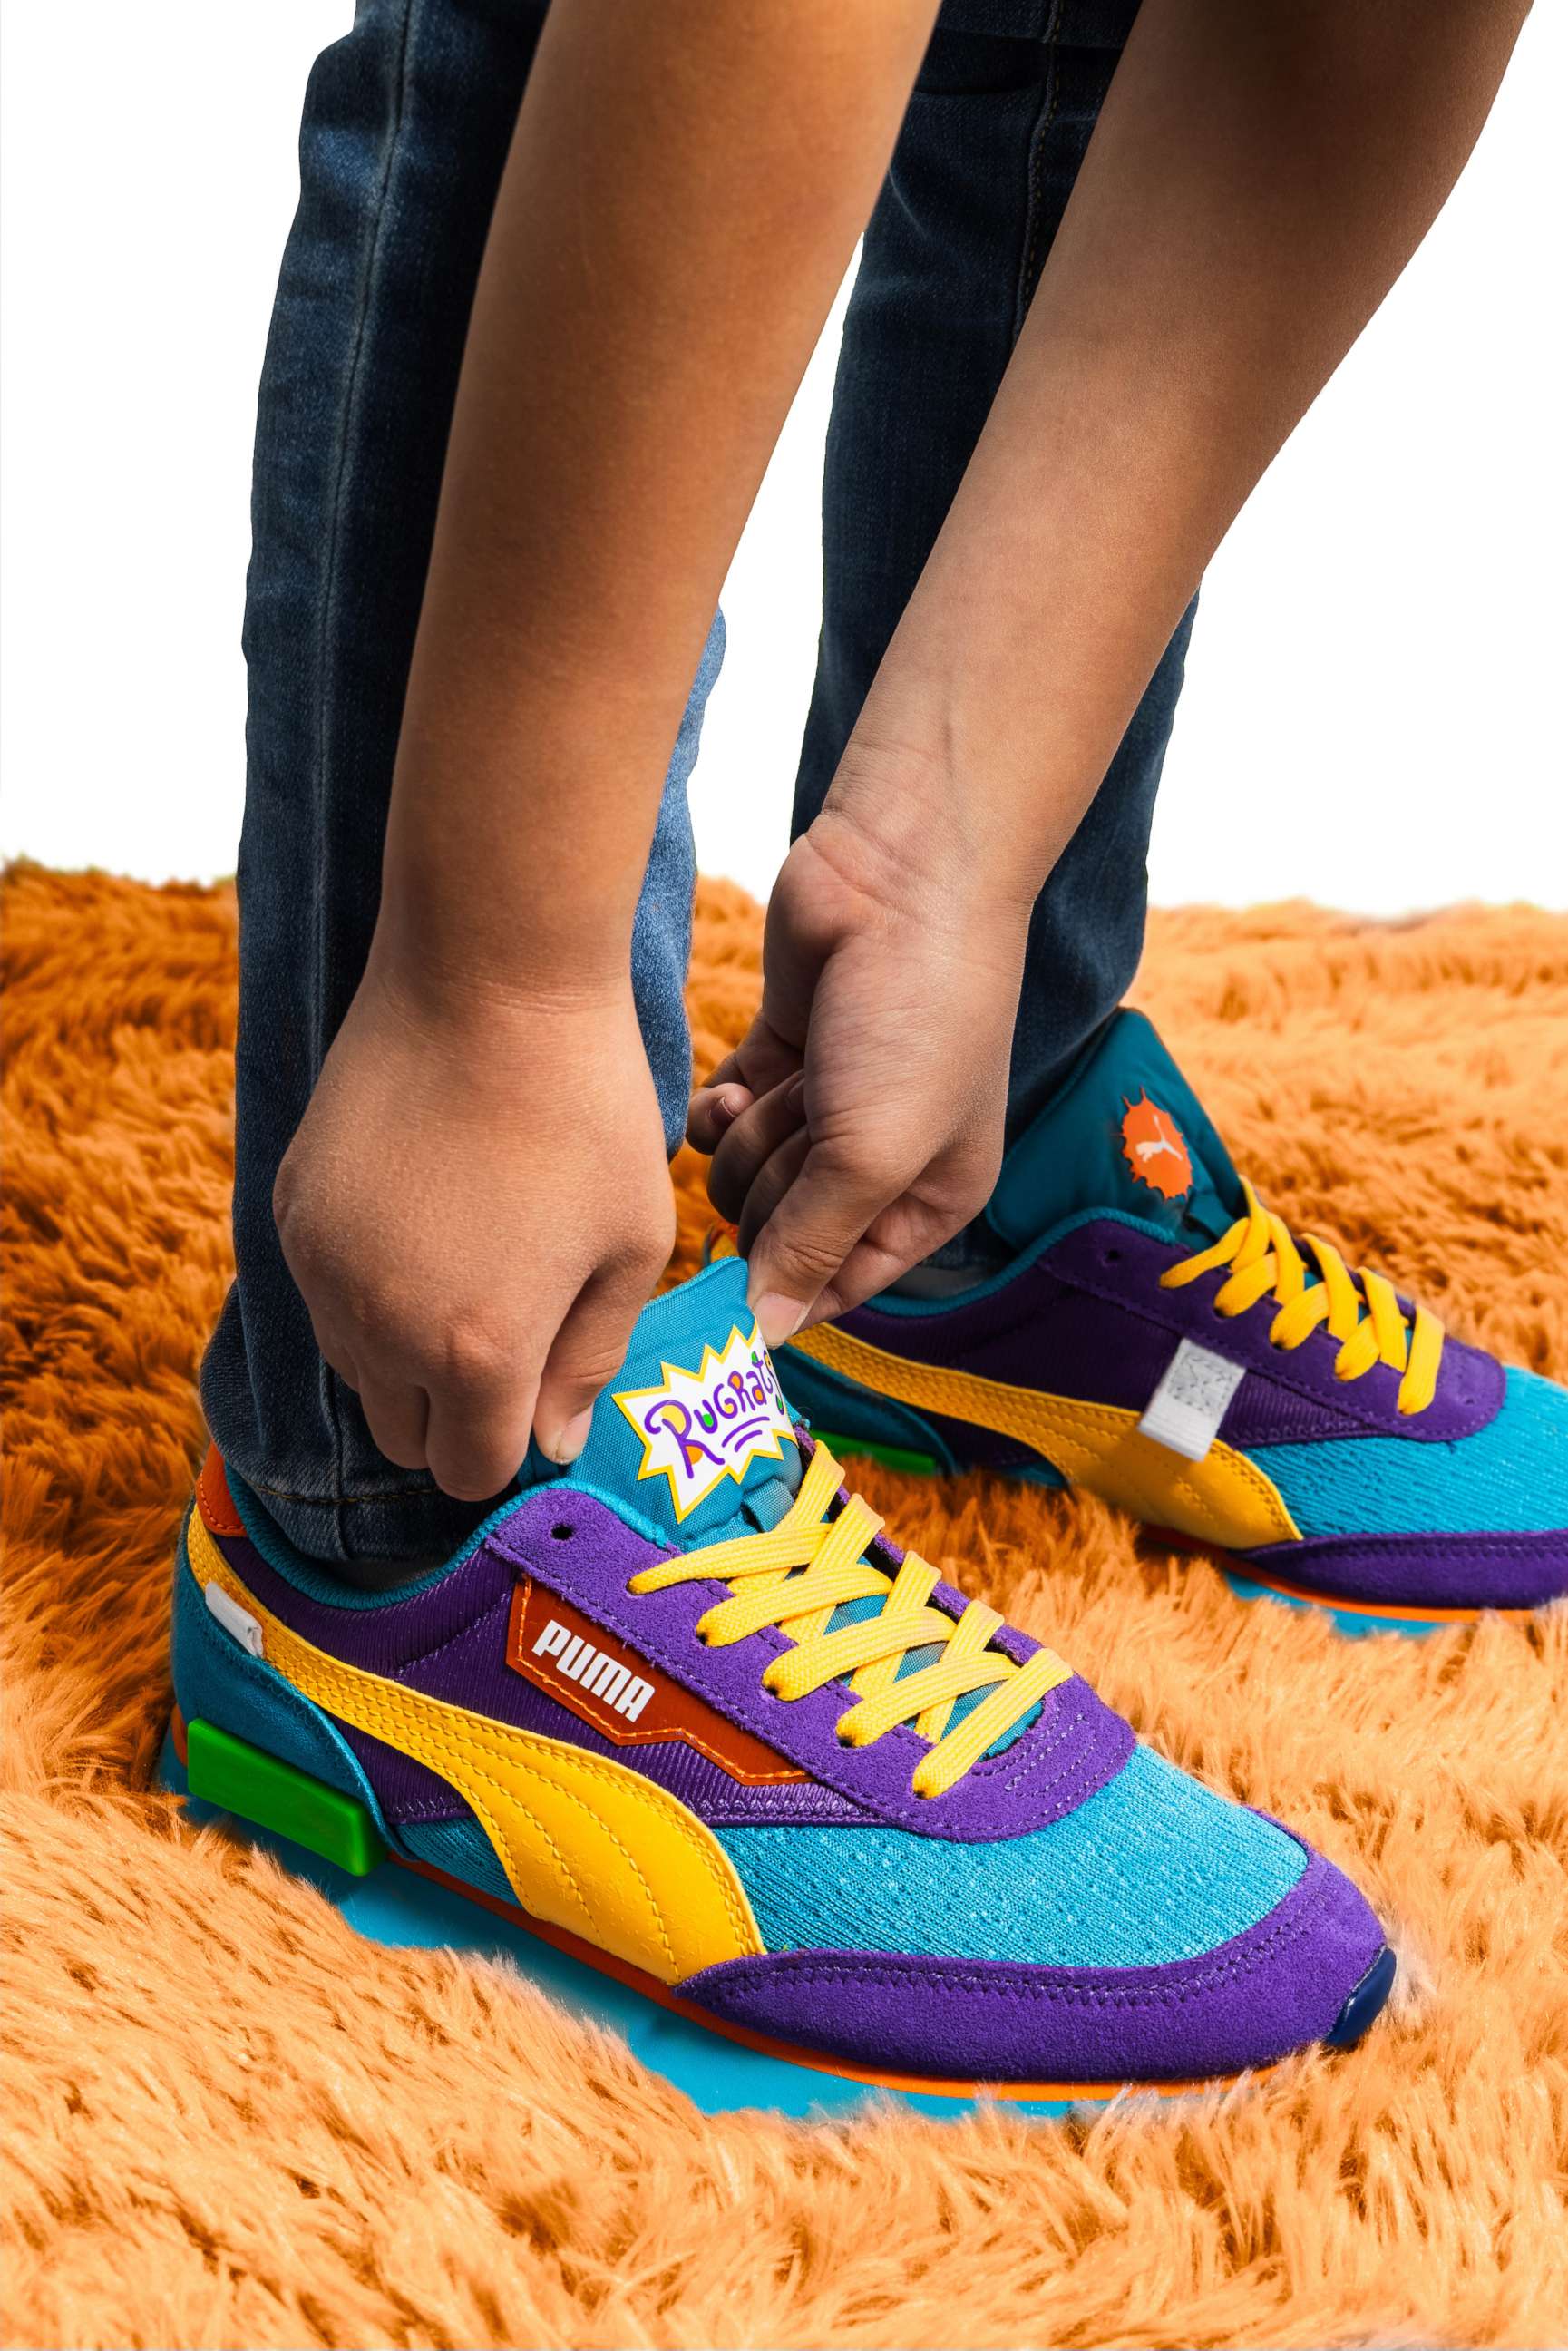 PHOTO: PUMA and Nickelodeon team up to celebrate "Rugrats" 30th anniversary with new collection.